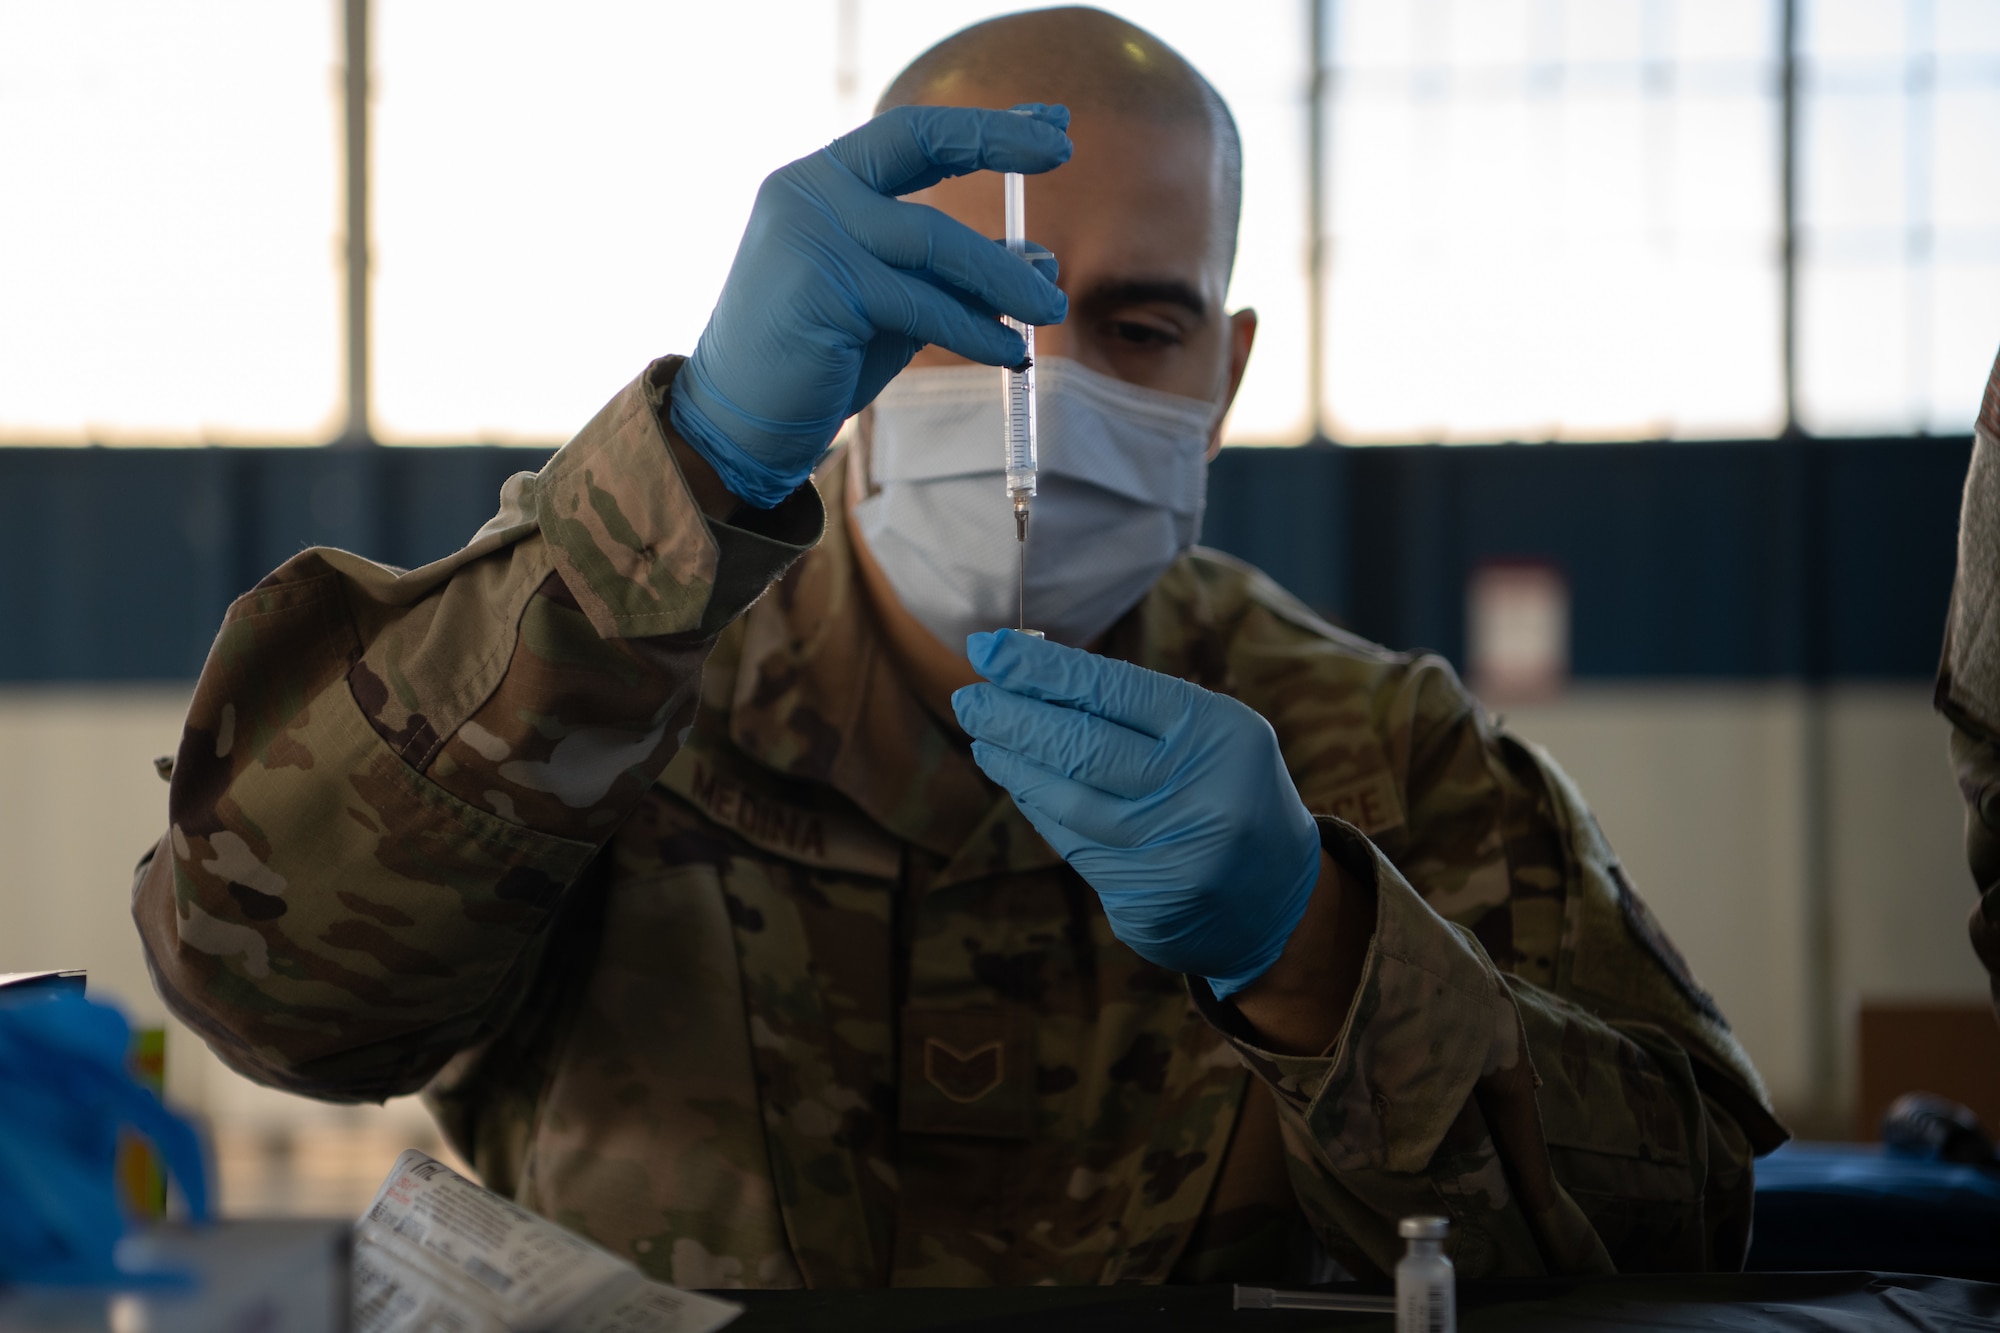 Staff Sgt. Jason Medina, 42nd Medical Group immunizations noncommissioned officer in charge, prepares the COVID-19 vaccine for administration Jan. 16, 2020, at the off-site clinic in the Honor Guard hangar on Maxwell Air Force Base, Alabama. Vaccines are currently voluntary and will be administered via appointment only, adhering to the prioritization schema developed by the Centers for Disease Control and Prevention and the Department of Defense.